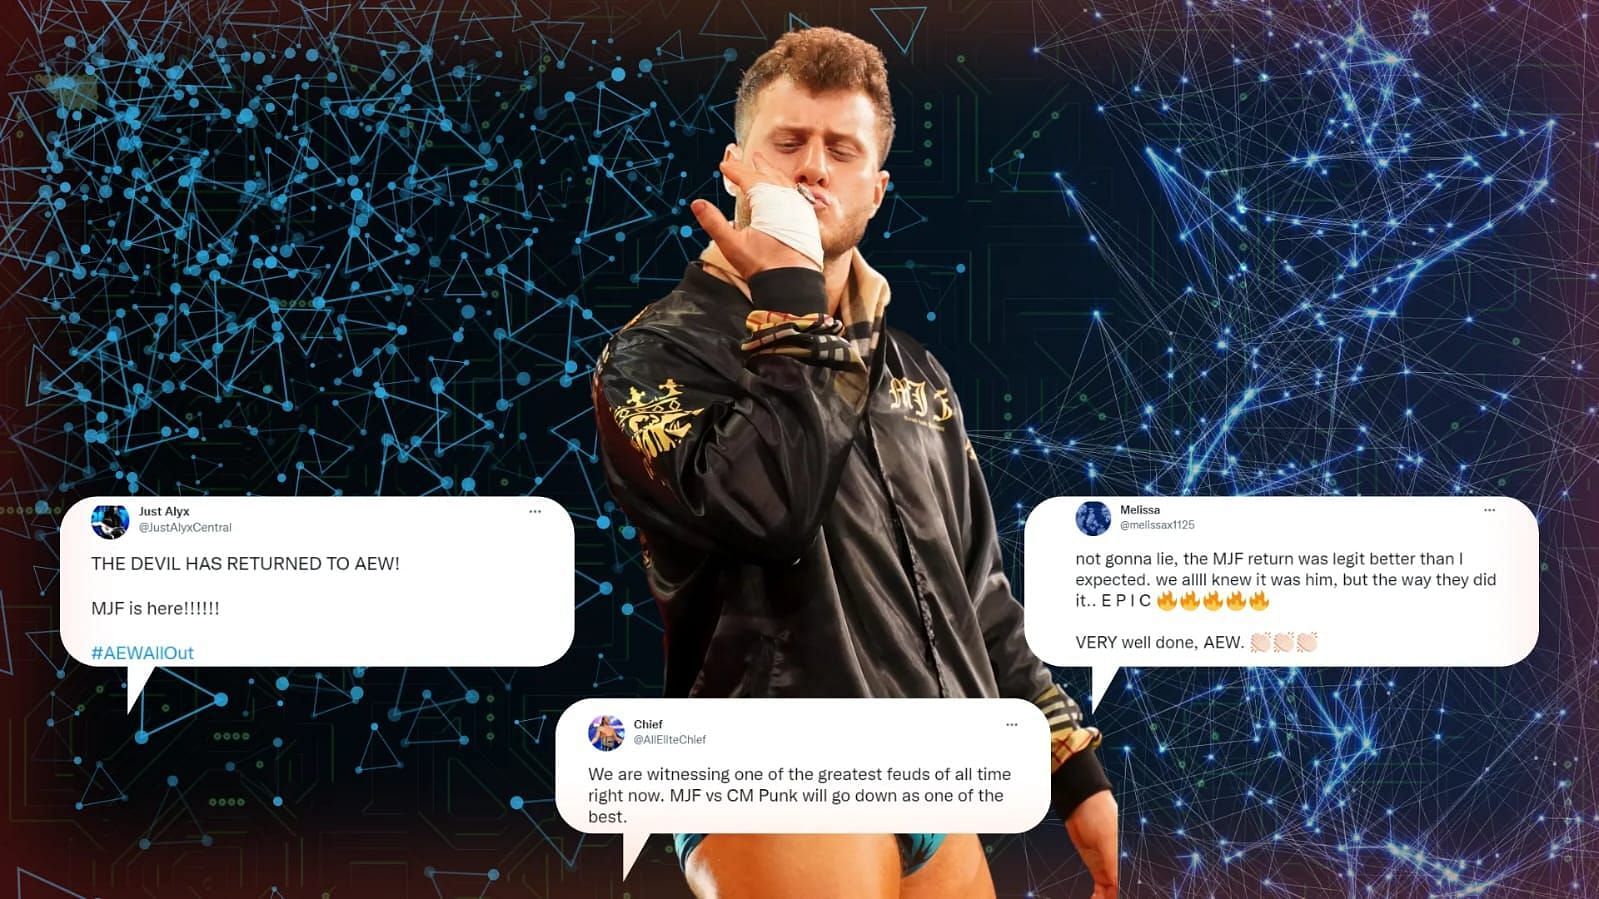 MJF made his AEW return at the All Out pay-per-view